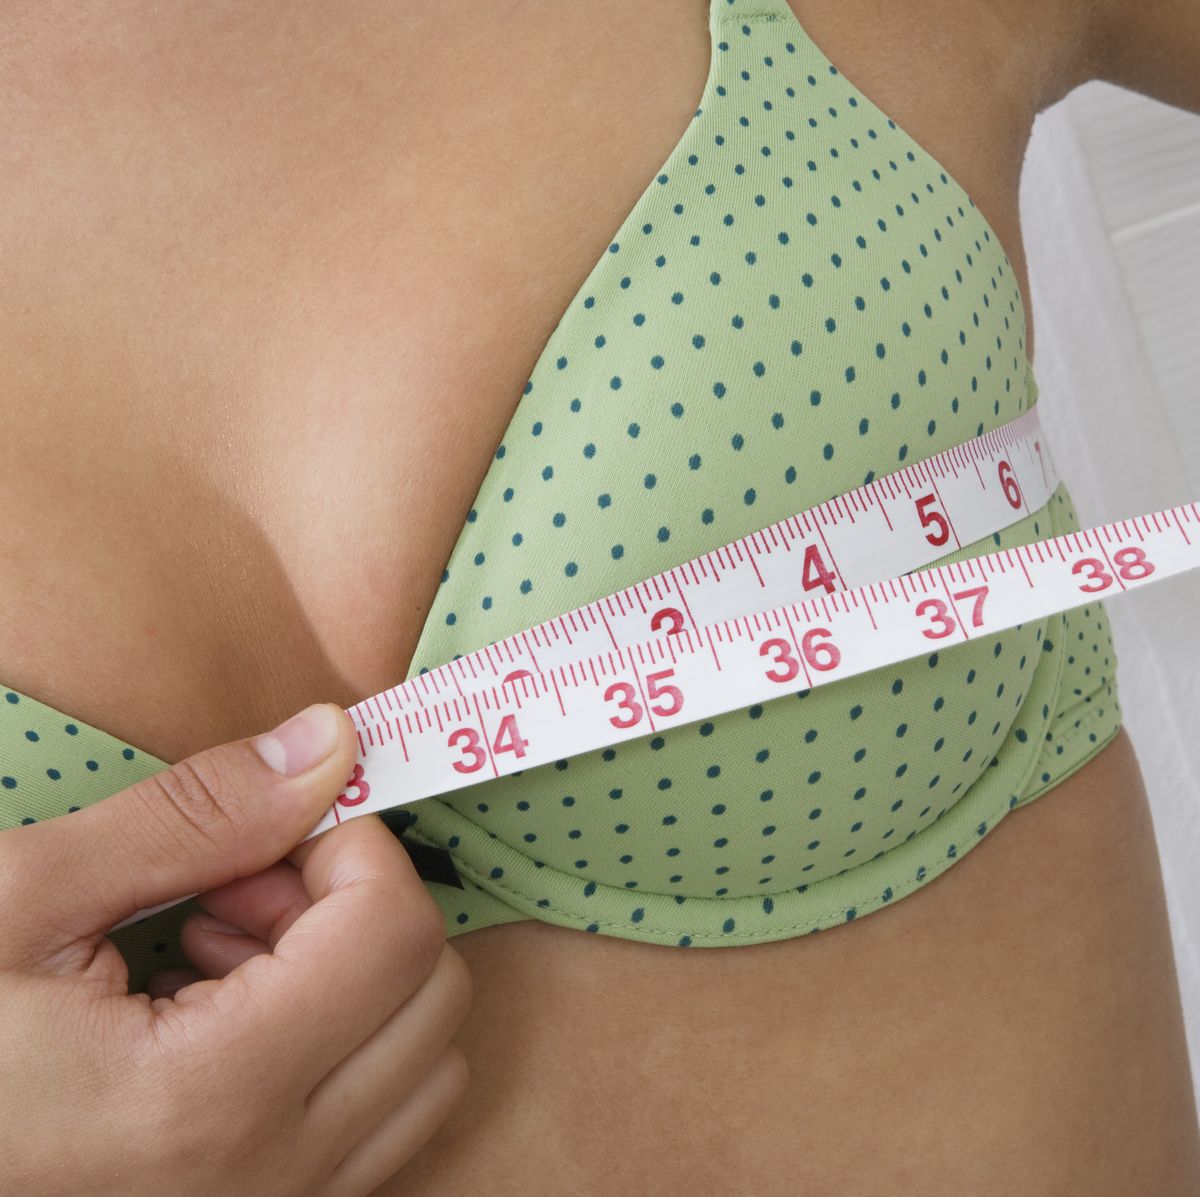 How To Measure Your Bra Size Perfectly At Home  Measure bra size, Bra size  calculator, Bra sizes